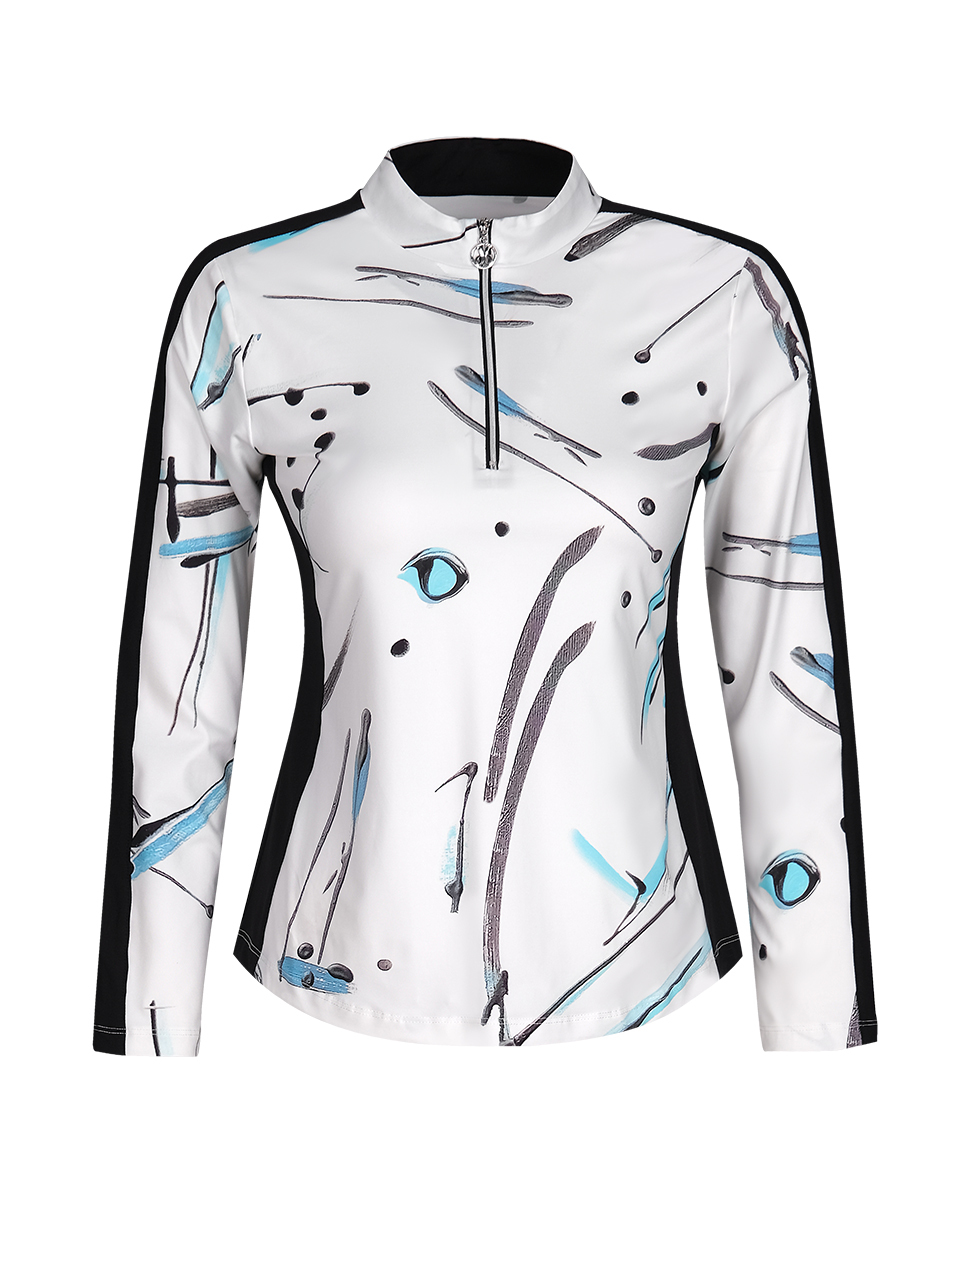 Golf Club Dolcezza: Thetys Long Sleeve Flared Comfort Art Top (Special Price, 1 Left!) Dolcezza_GolfClub_22426